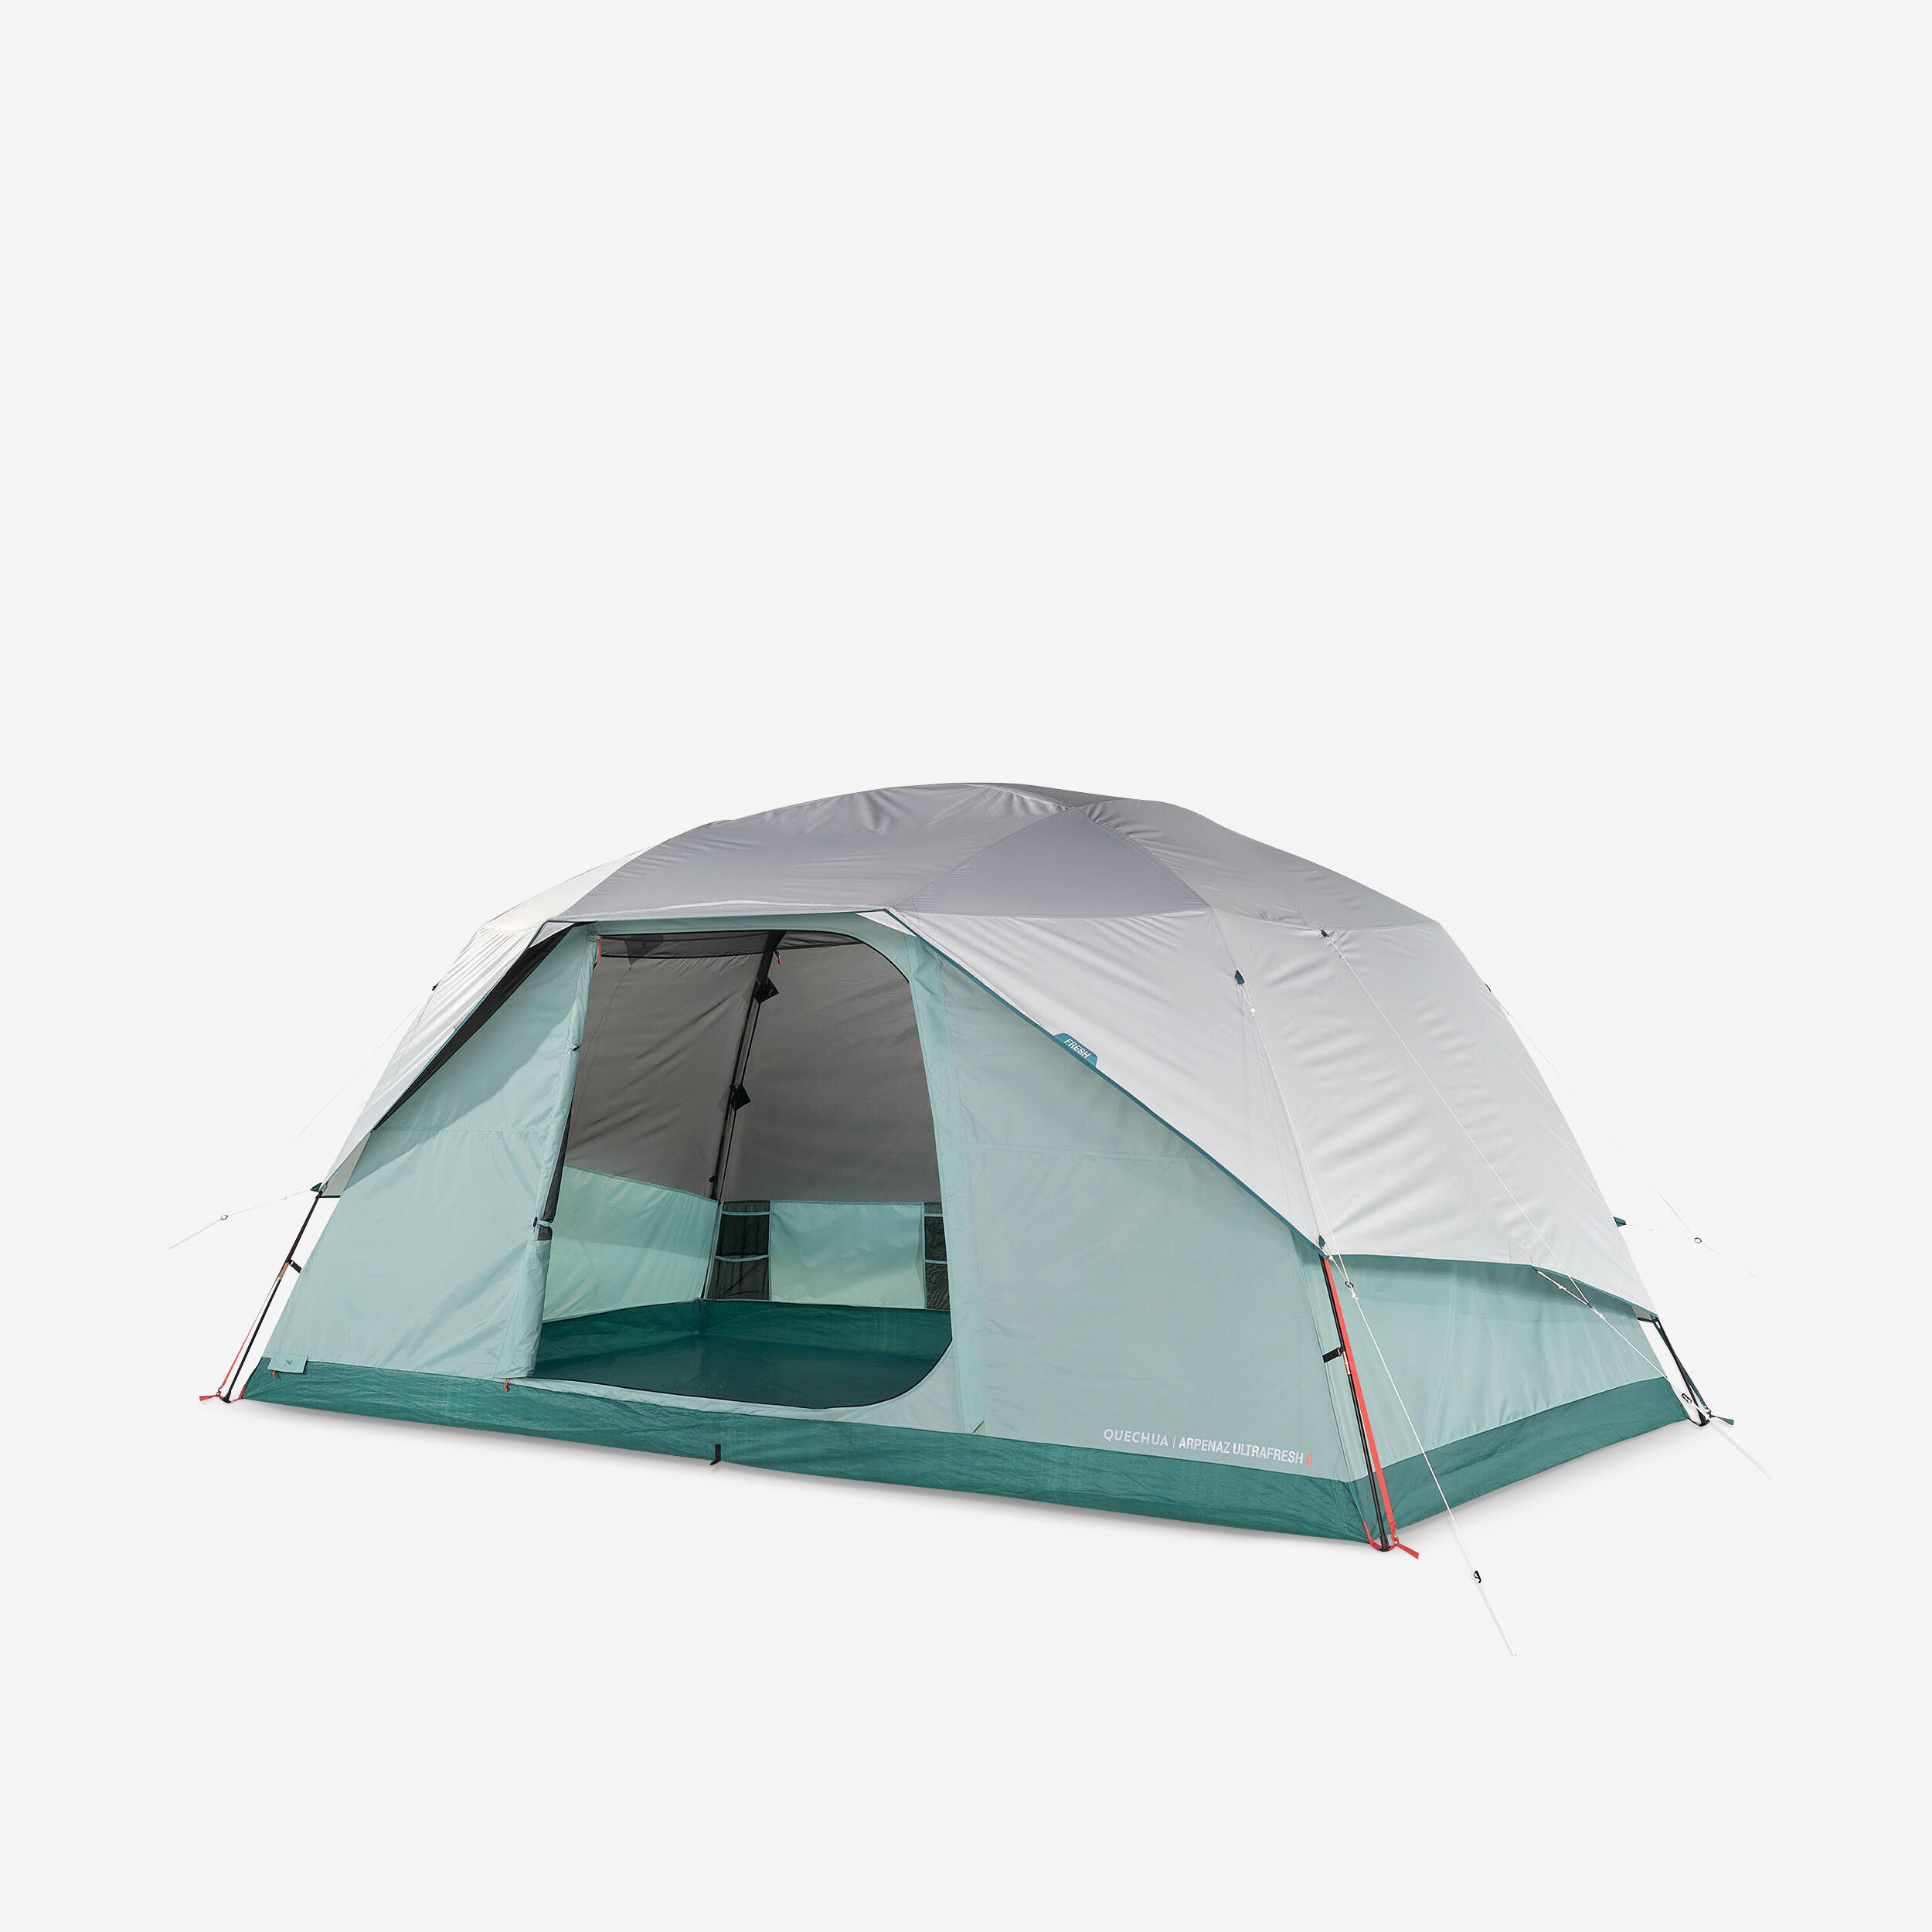 QUECHUA Camping tent with poles - Arpenaz 6 ULTRAFRESH - 6 Person